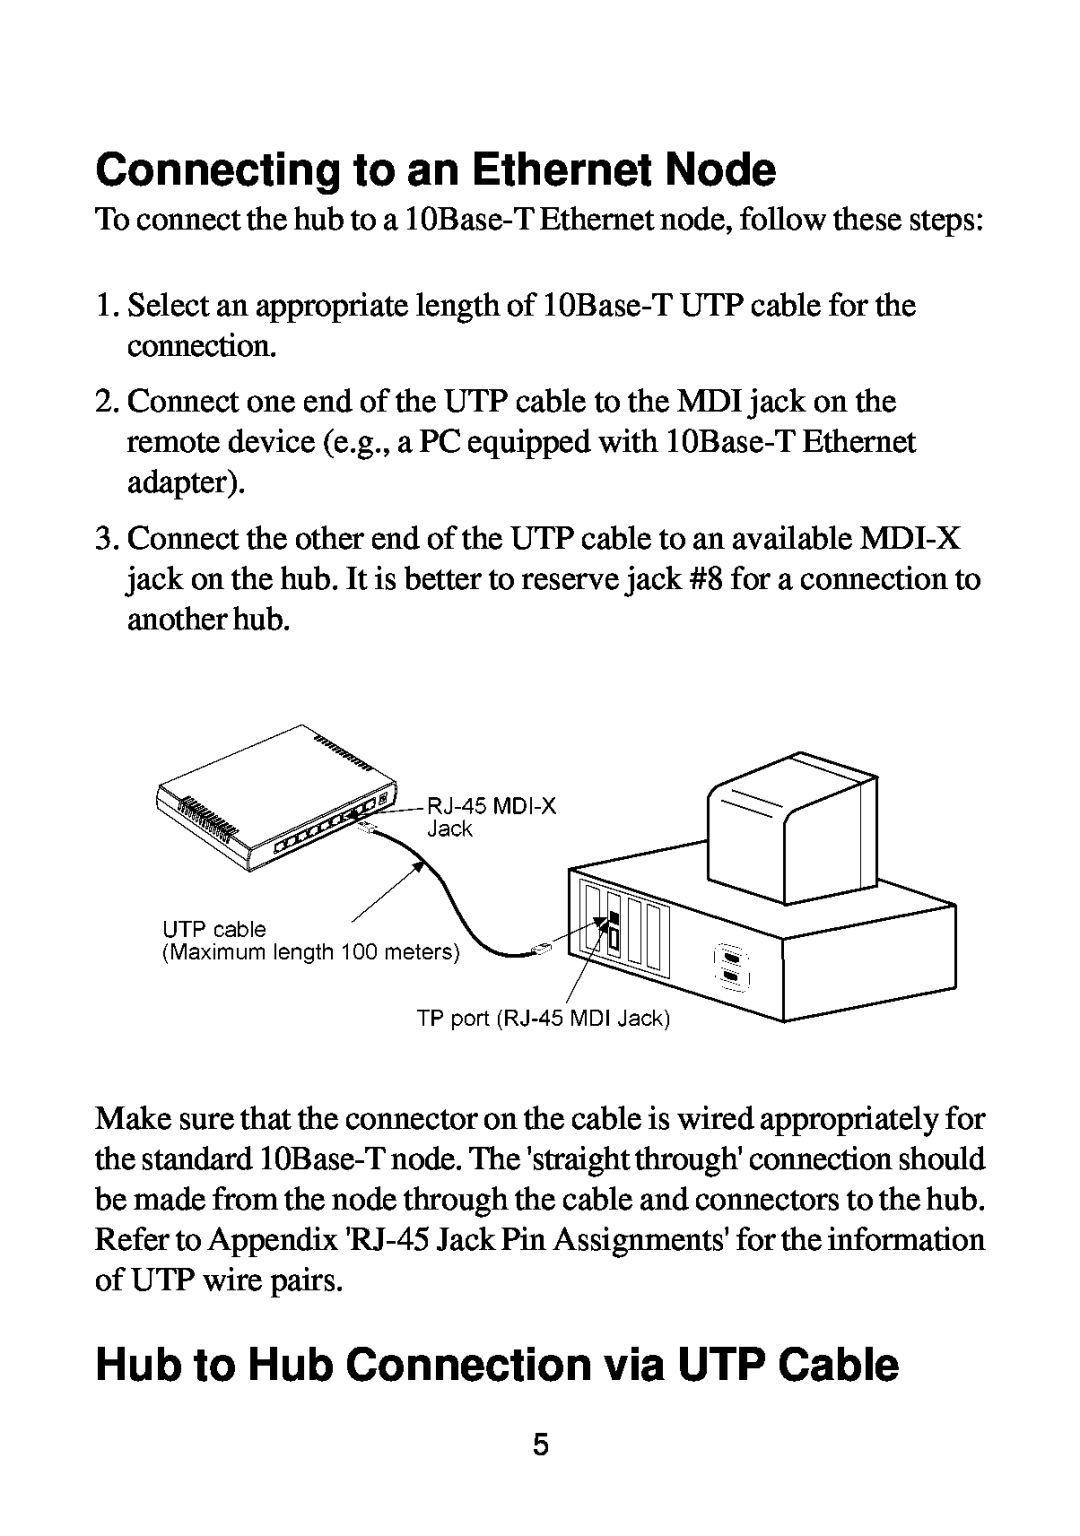 KTI Networks DH-8T manual Connecting to an Ethernet Node, Hub to Hub Connection via UTP Cable 